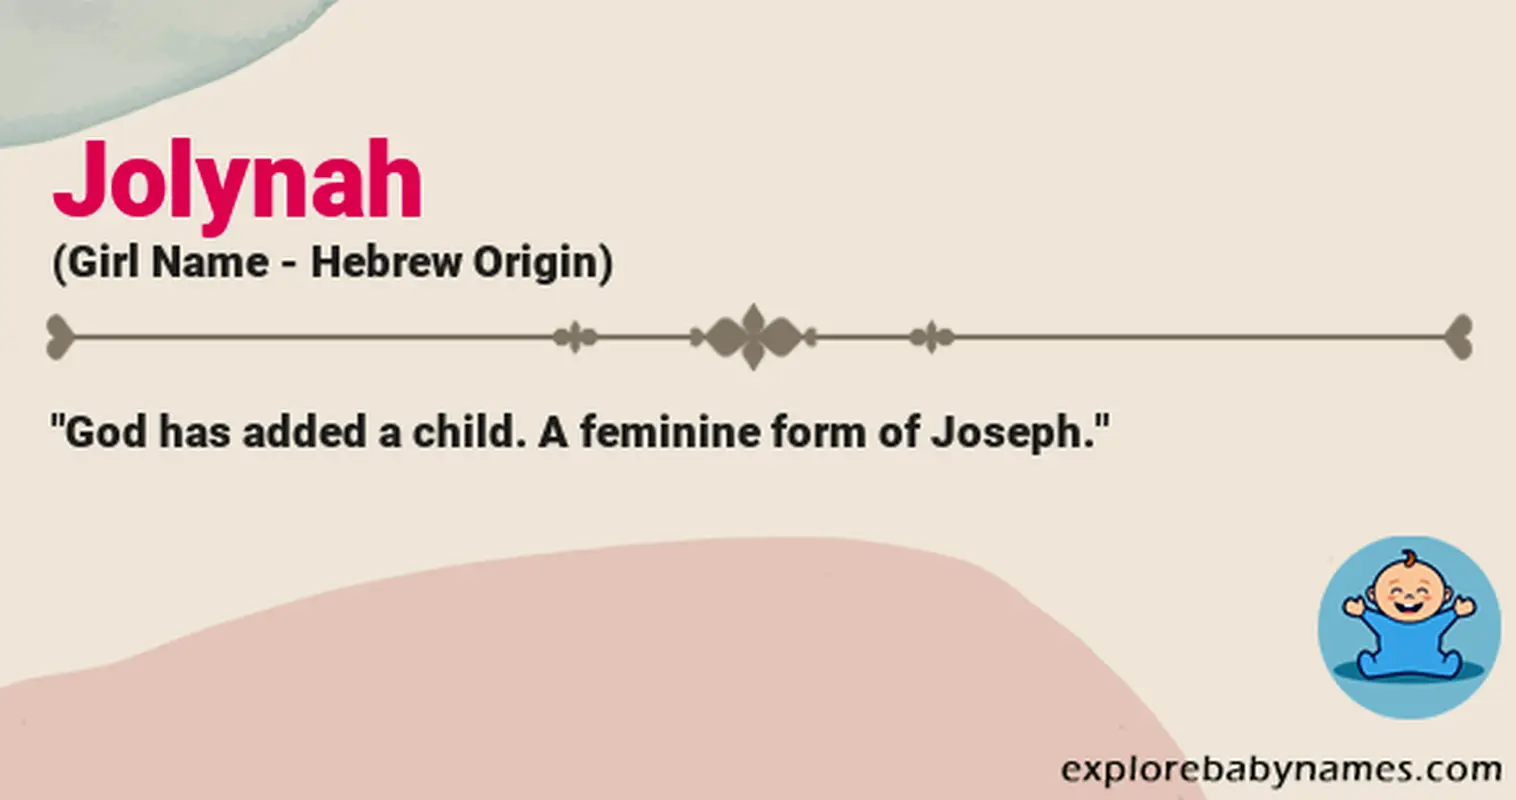 Meaning of Jolynah